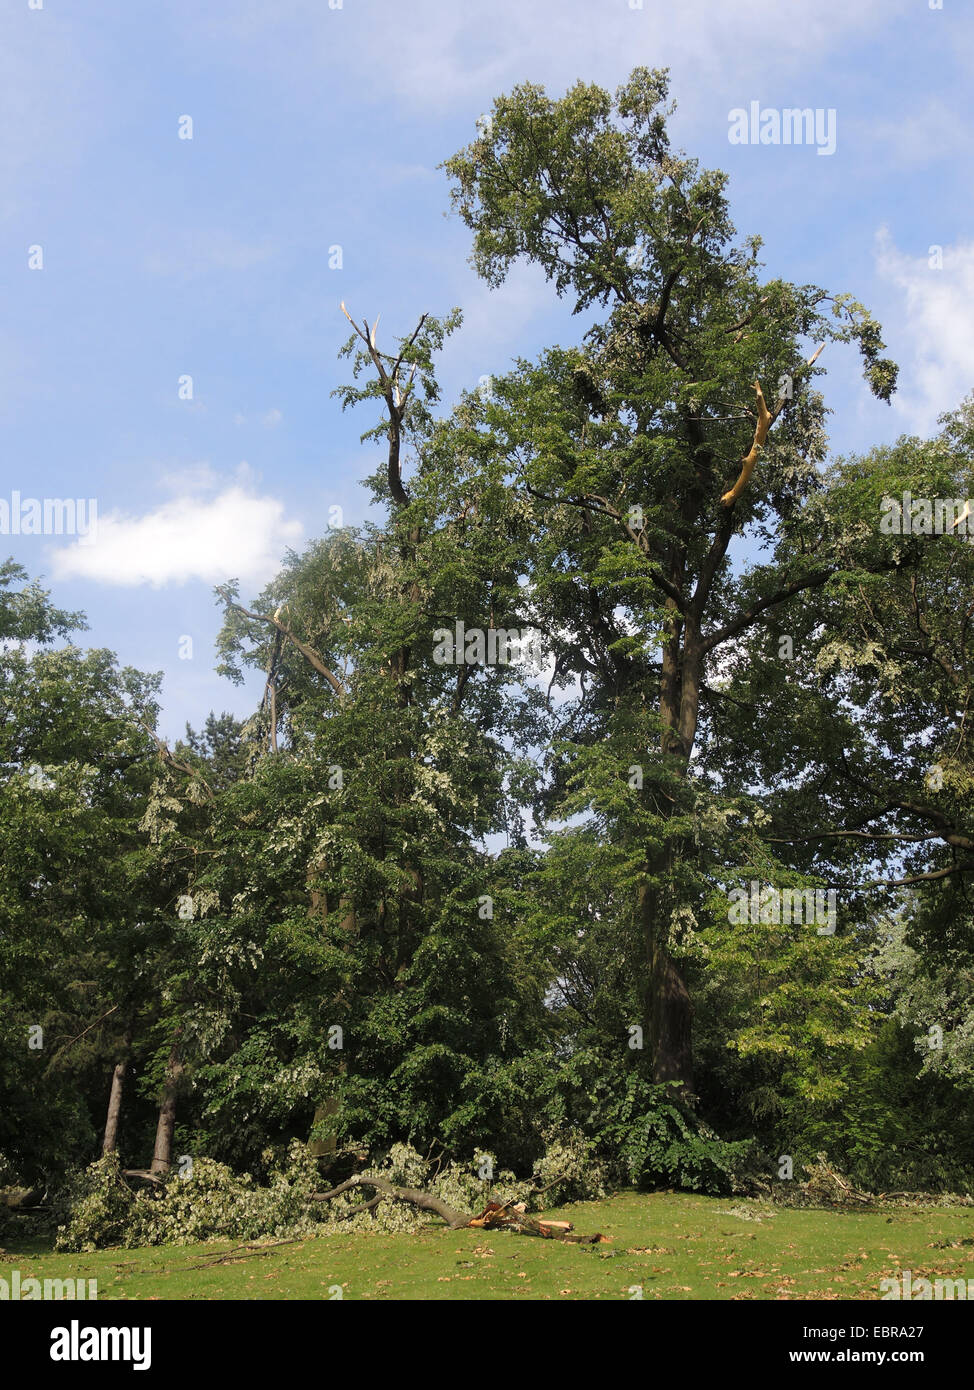 silver linden (Tilia tomentosa), ravaged city park of Bochum by fallen trees and broken branches, storm front Ela at 2014-06-09, Germany, North Rhine-Westphalia, Ruhr Area, Bochum Stock Photo